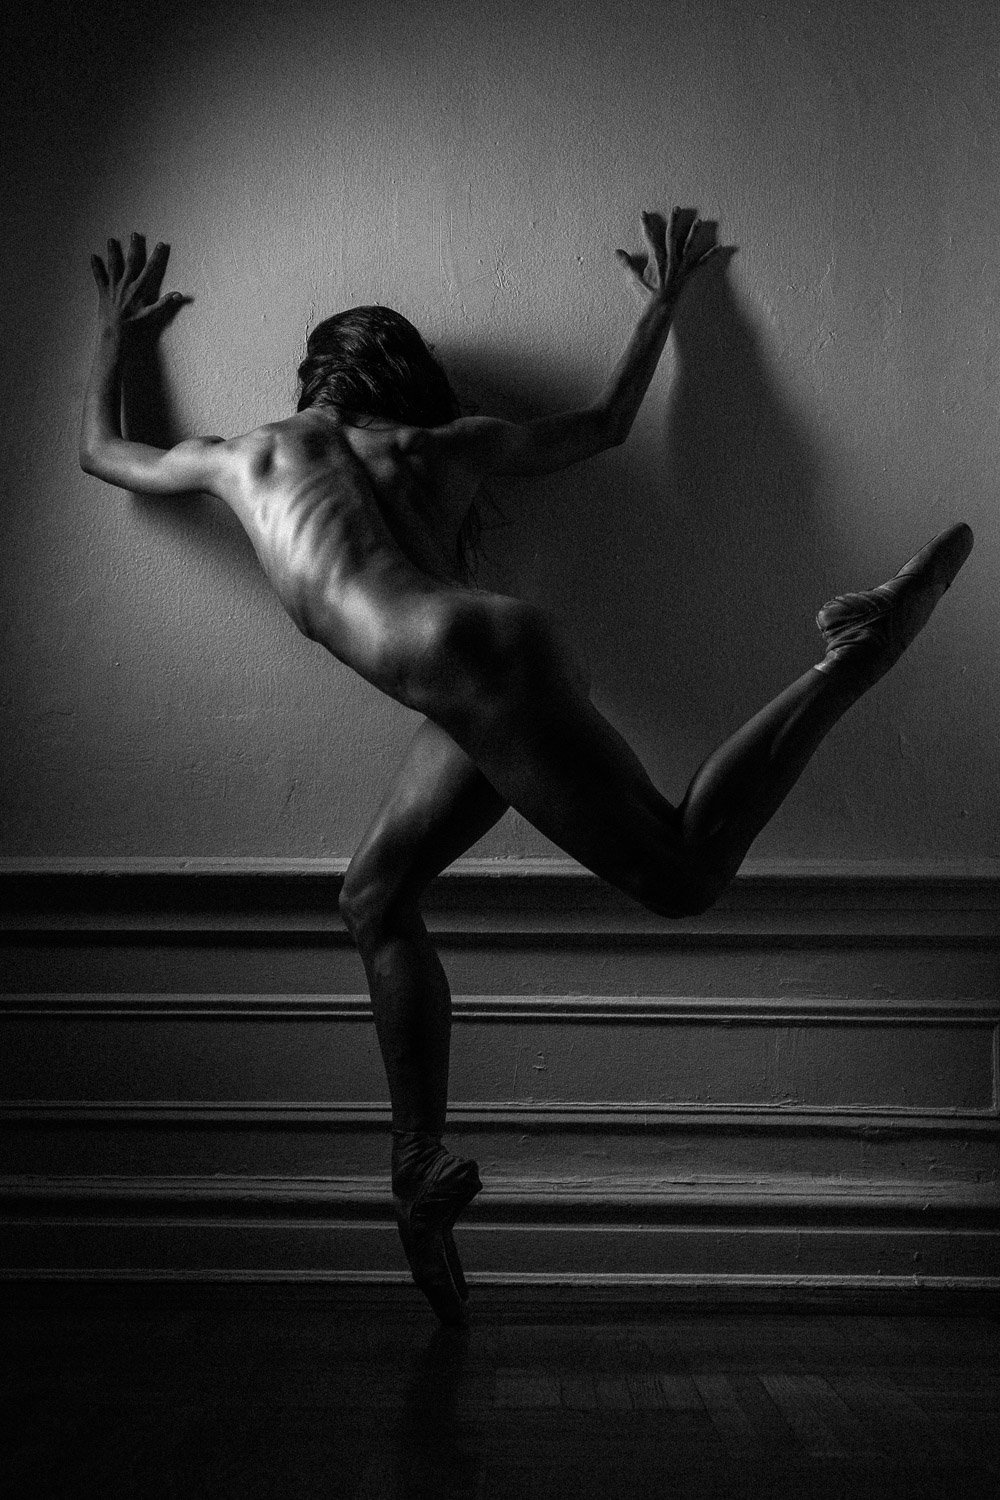 Theik Smith: Dancer Portraits in Black and White (NSFW)